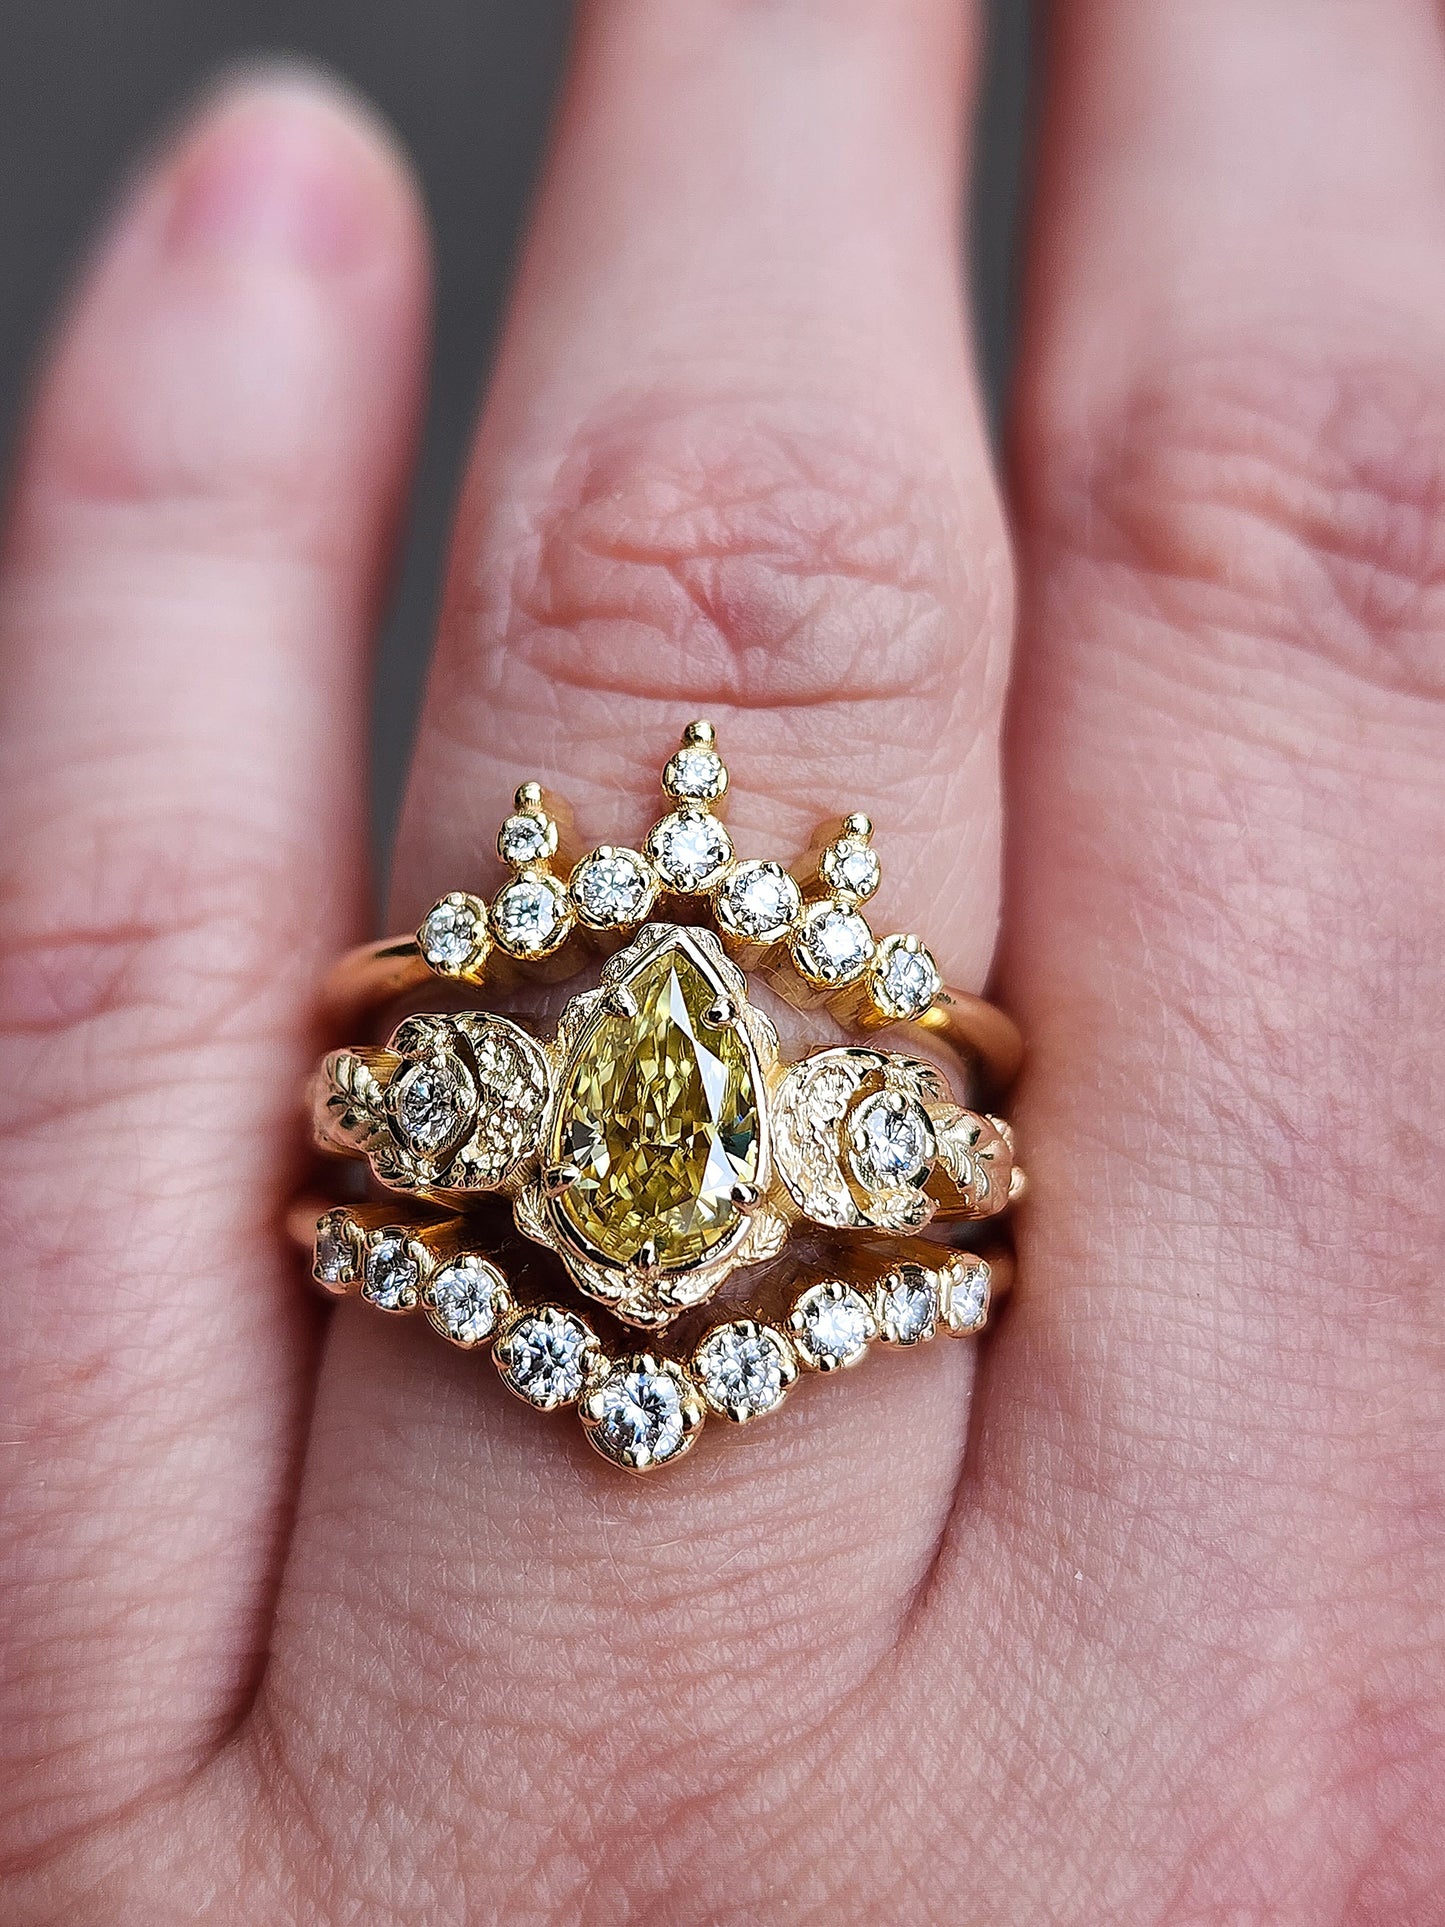 Ready to Ship Size 6 - 8 - Leaf and Moon Engagement Ring Set with Graduated Diamond Chevron and Diamond Crown Wedding Bands - Yellow Moissanite Pear - 14k Yellow Gold